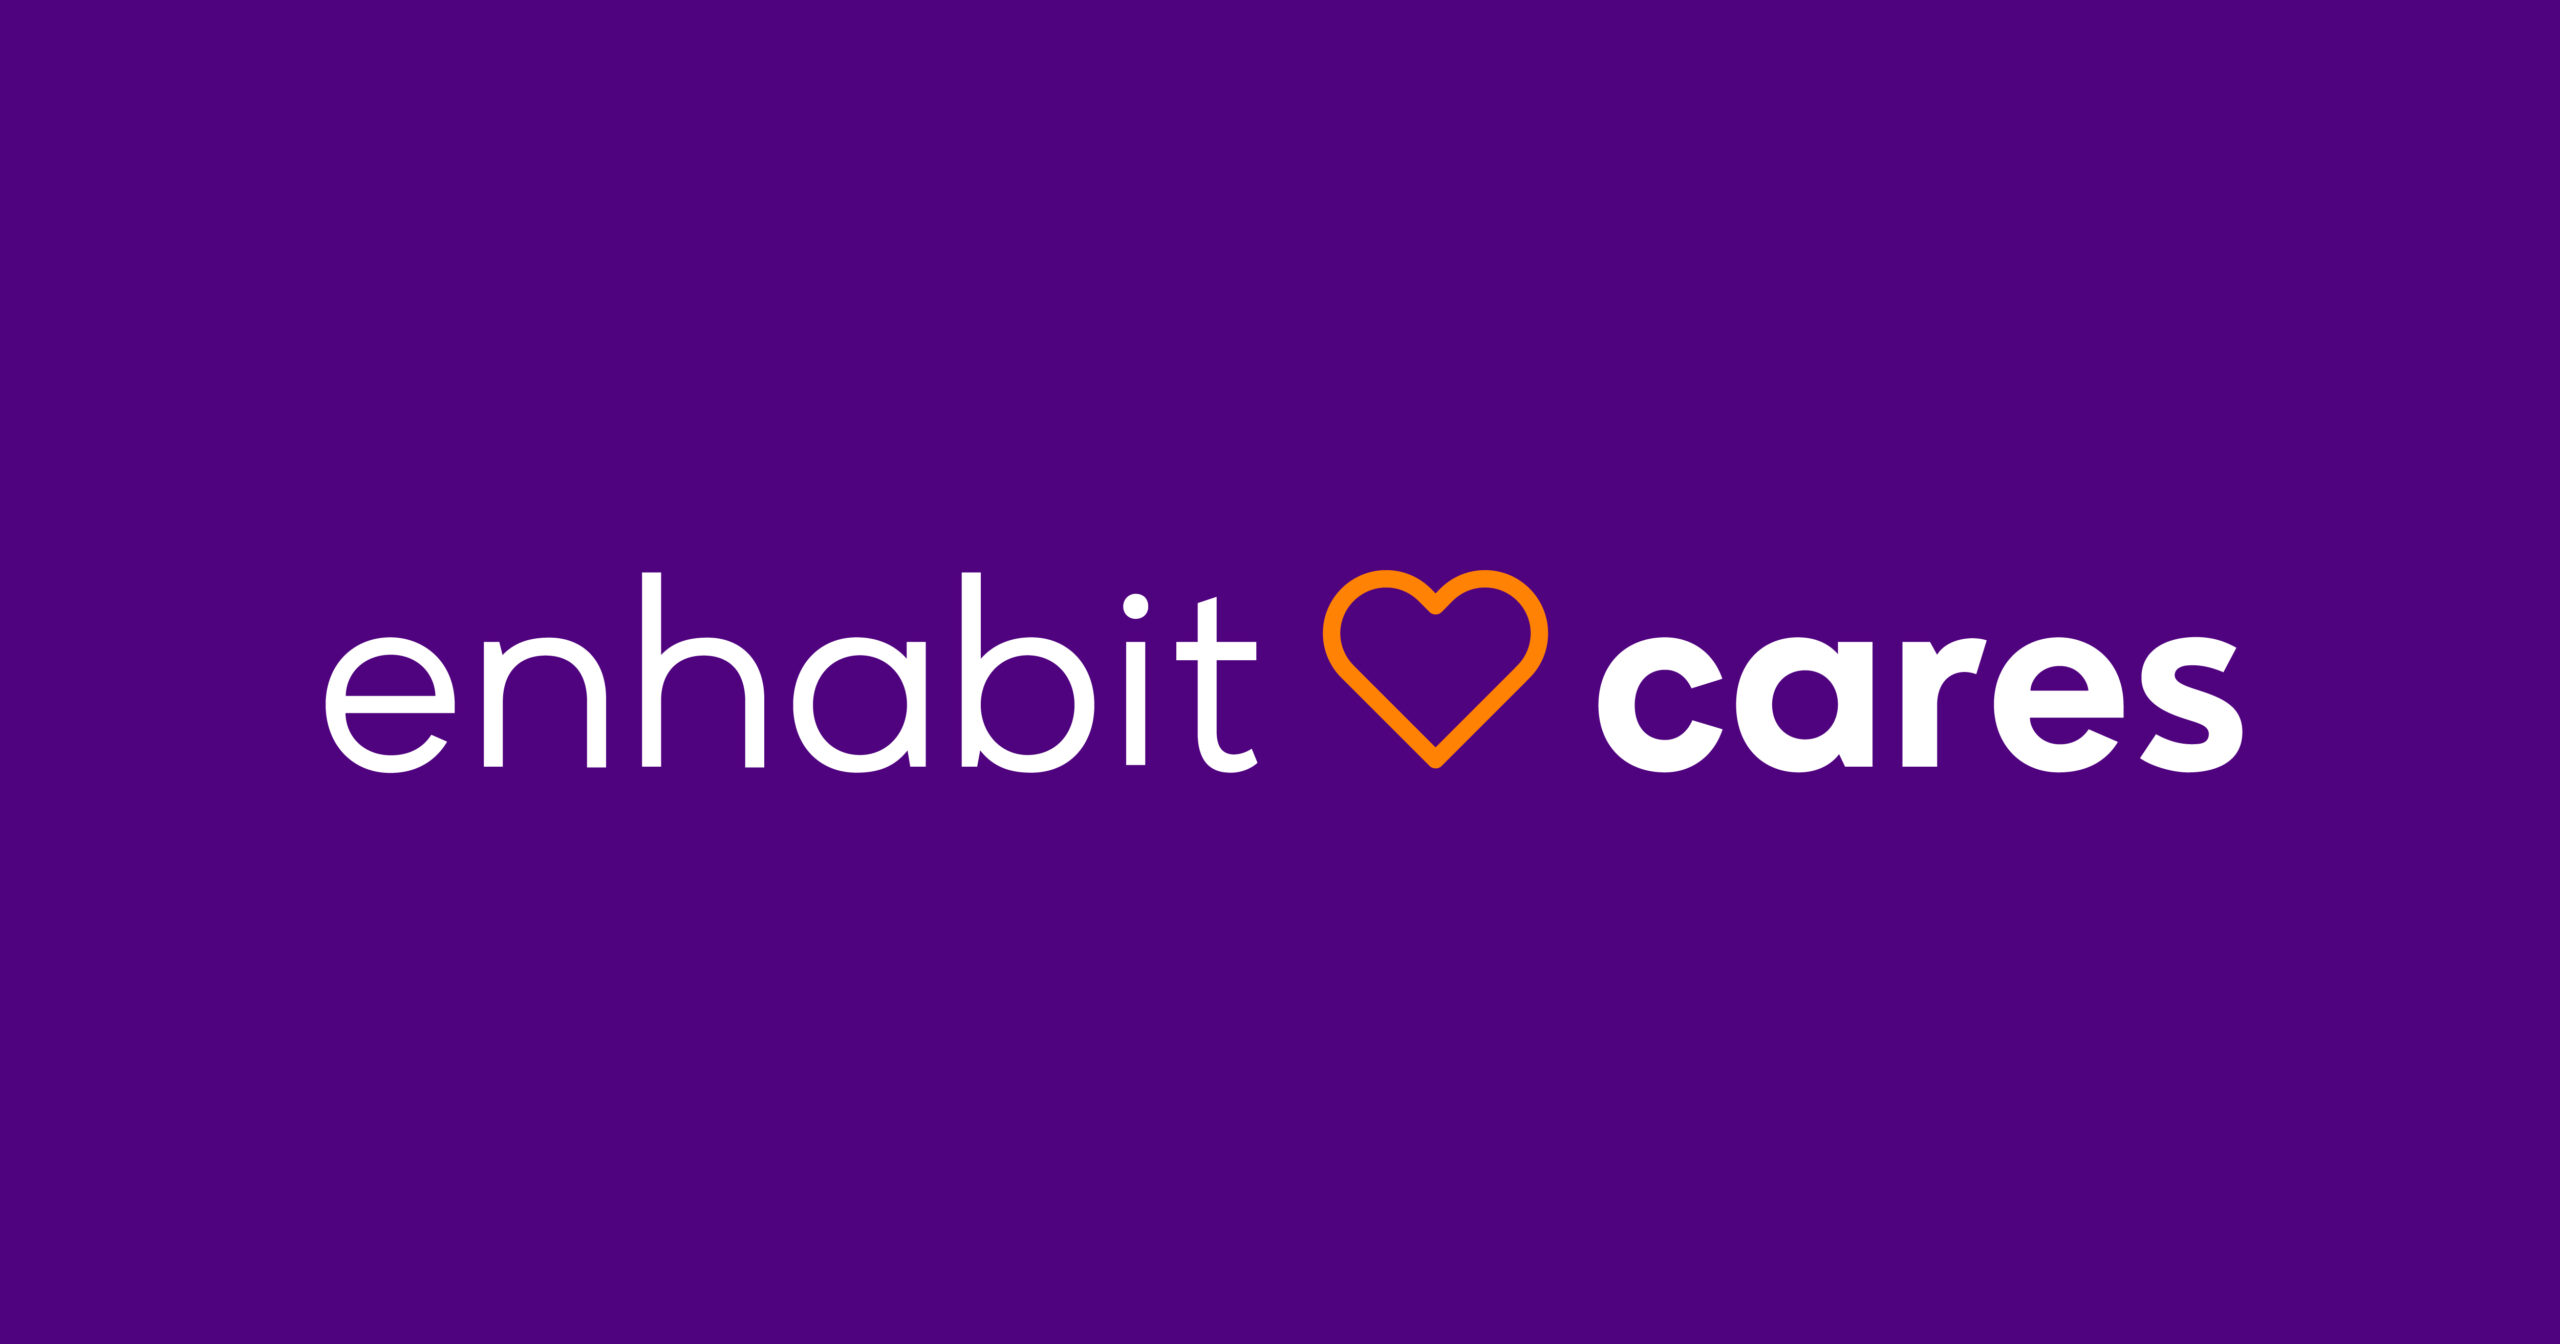 How Enhabit Cares gives back to employees